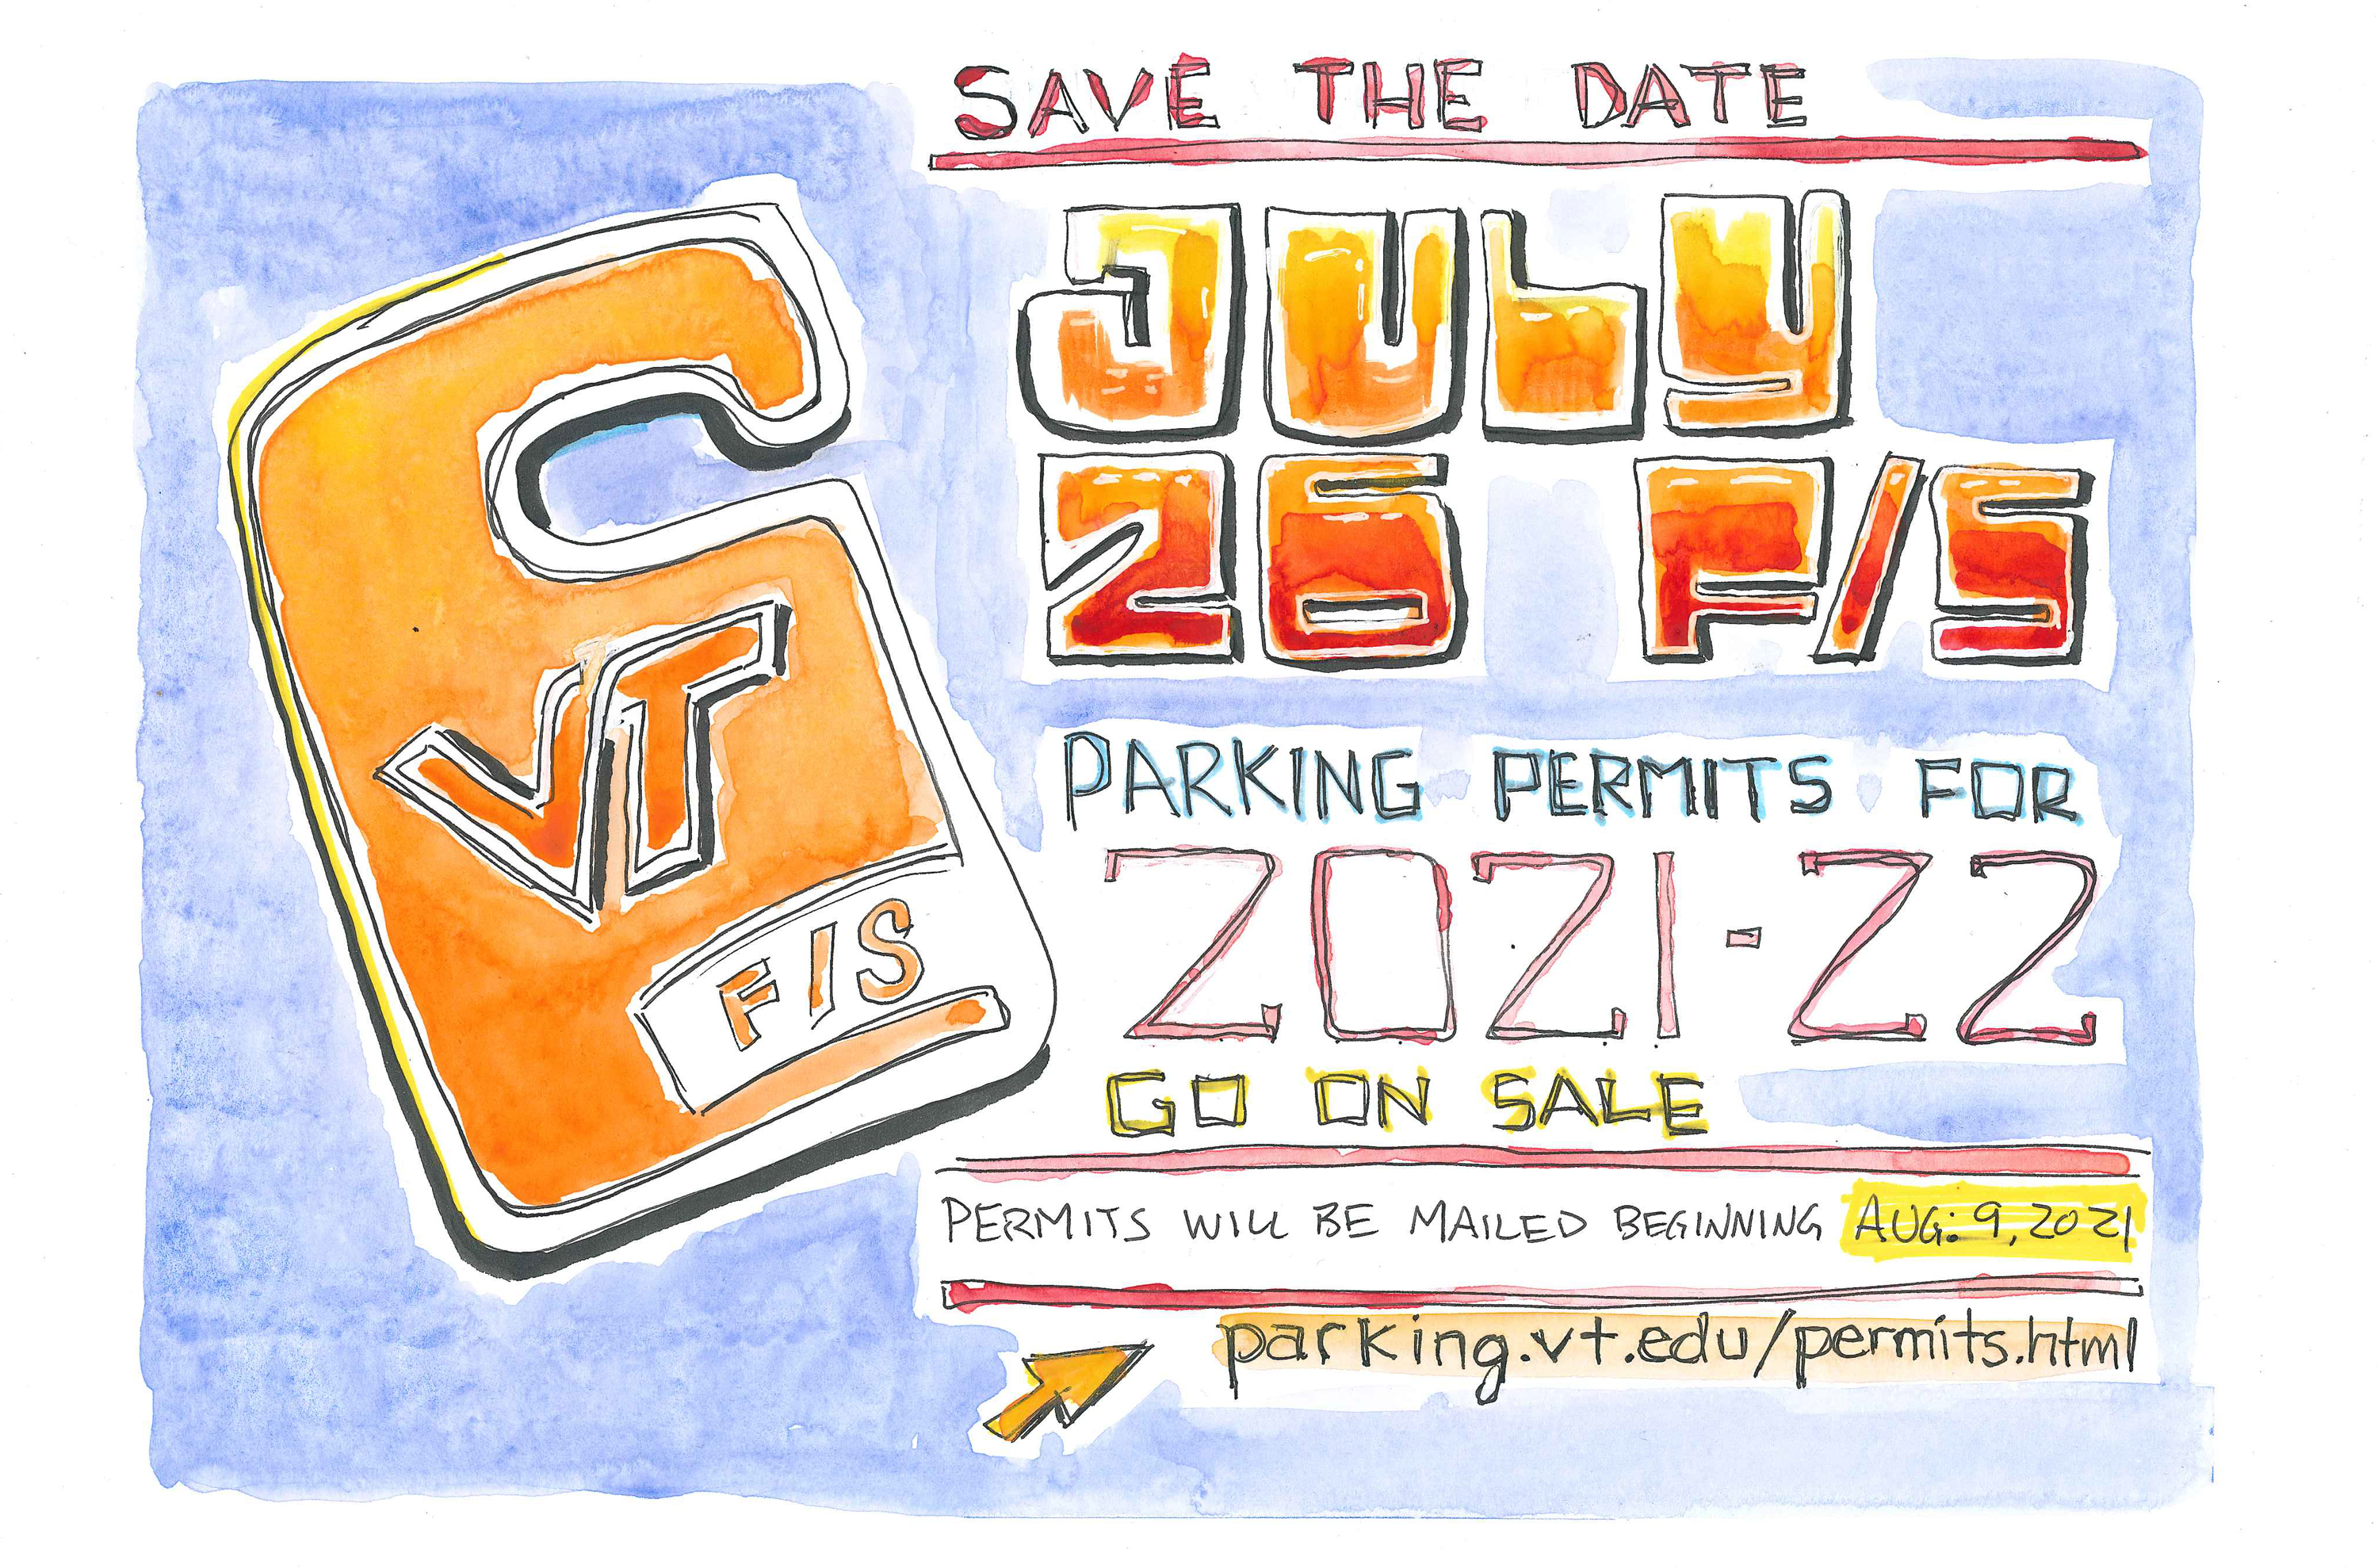 Ink and watercolor sketch of a reminder to save the date for parking permit purchases